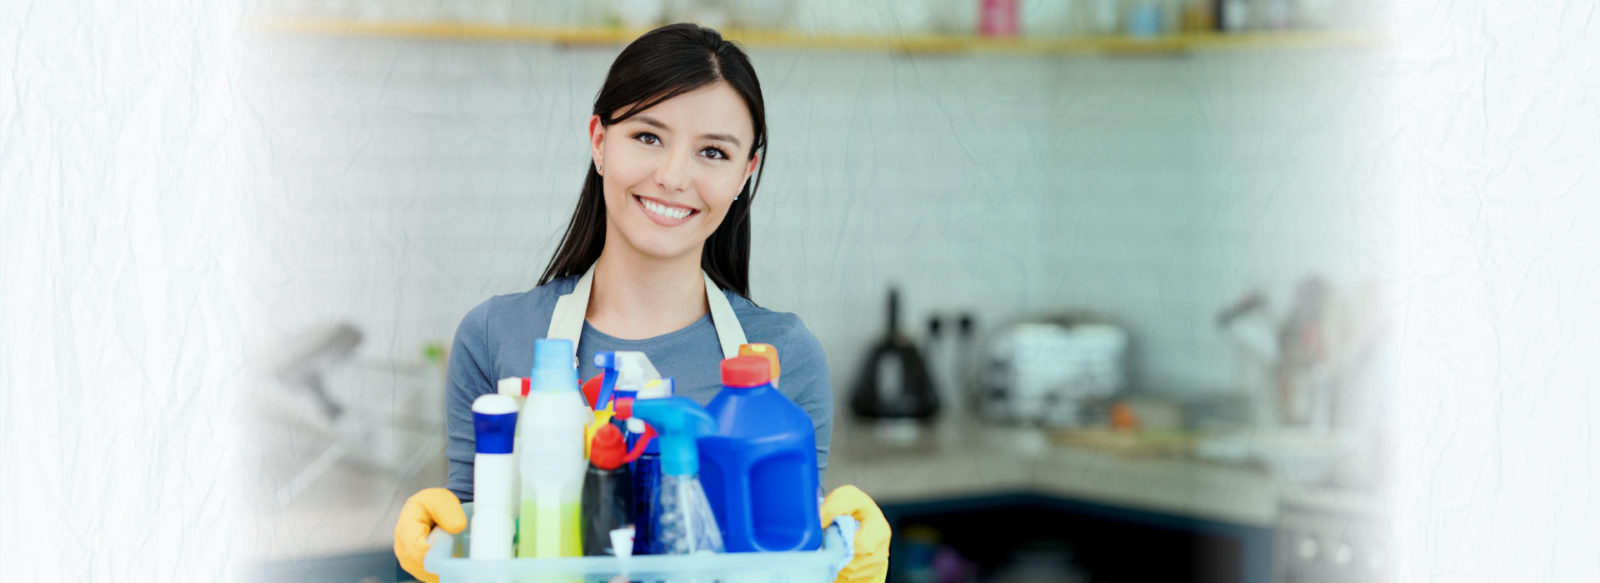 Finding the Perfect Cleaning Product